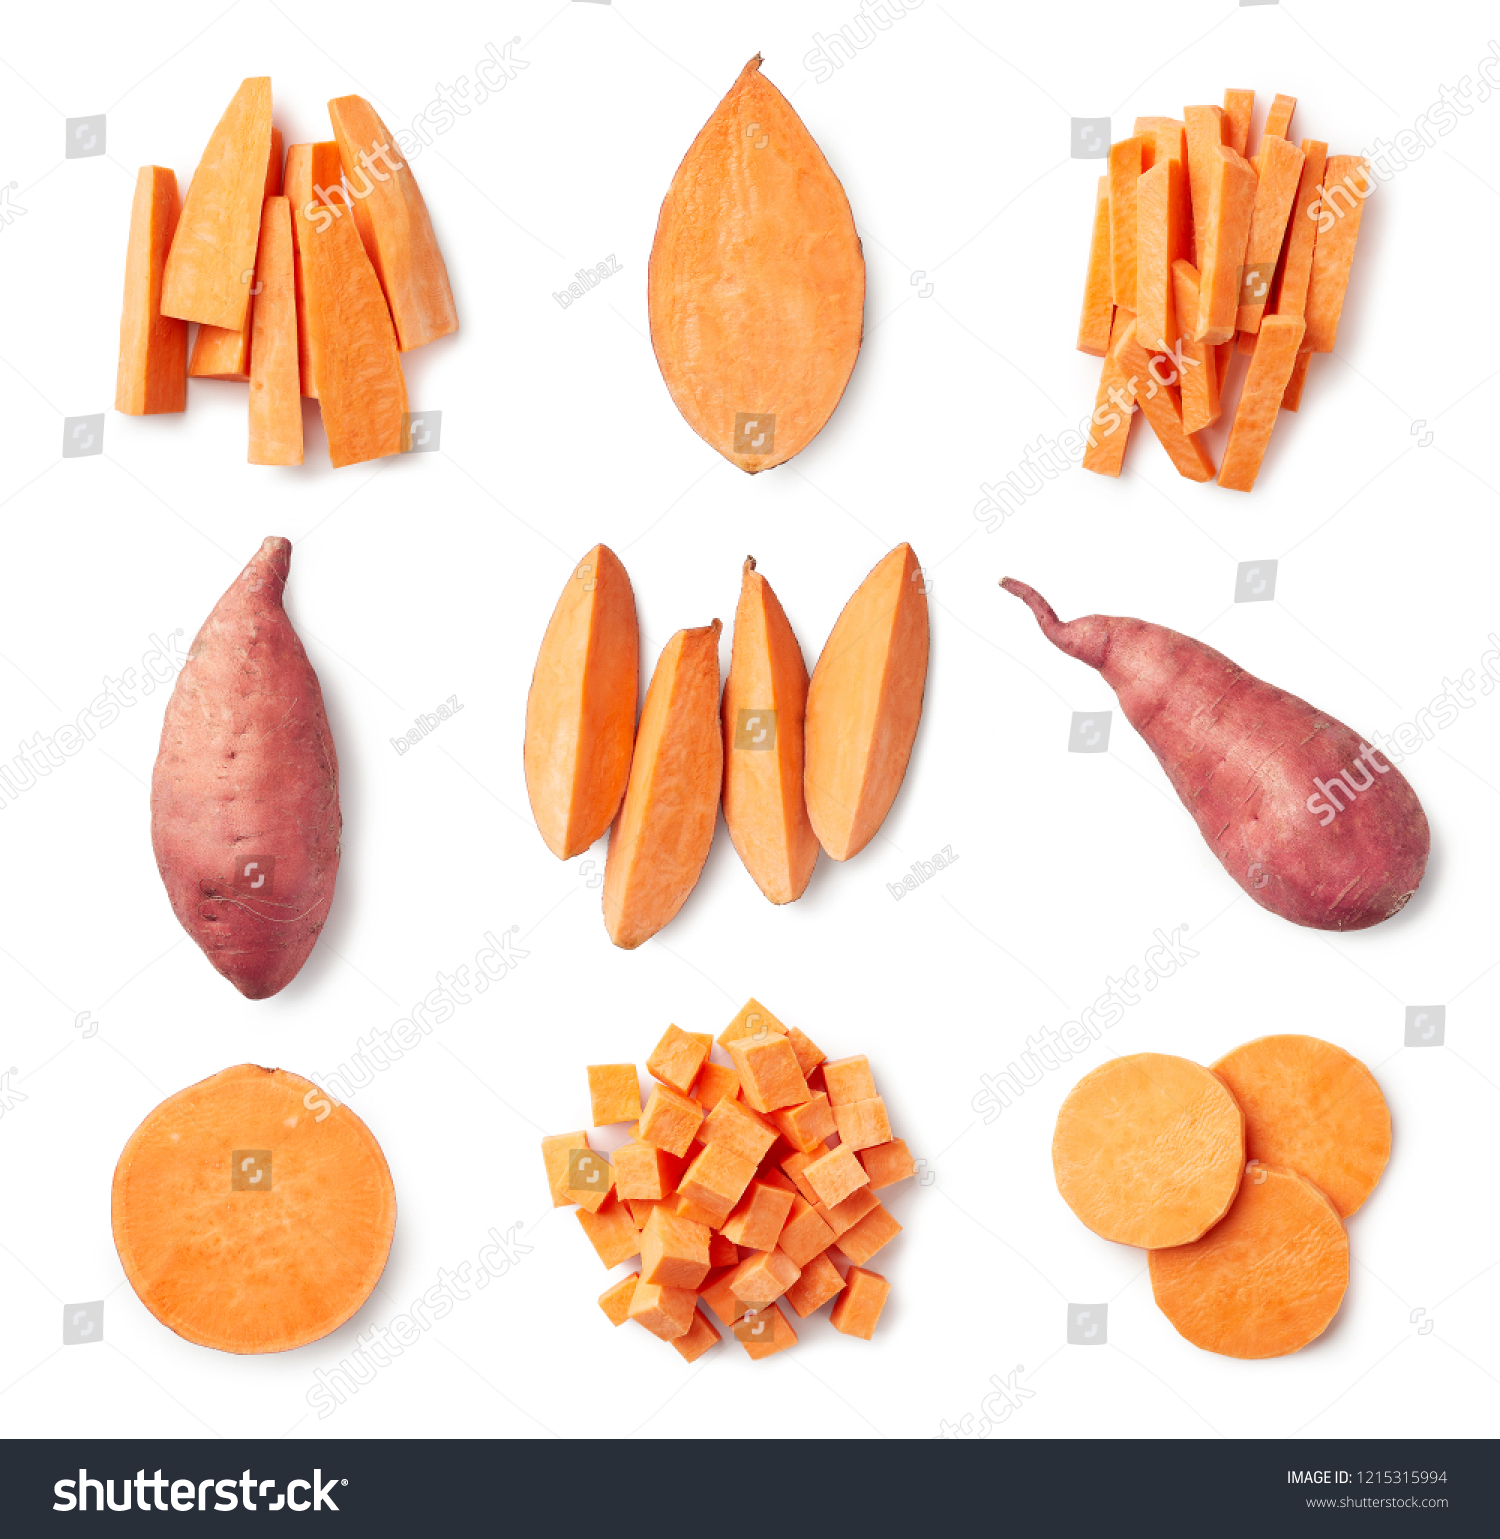 Set of fresh whole and sliced sweet potatoes isolated on white background. Top view #1215315994